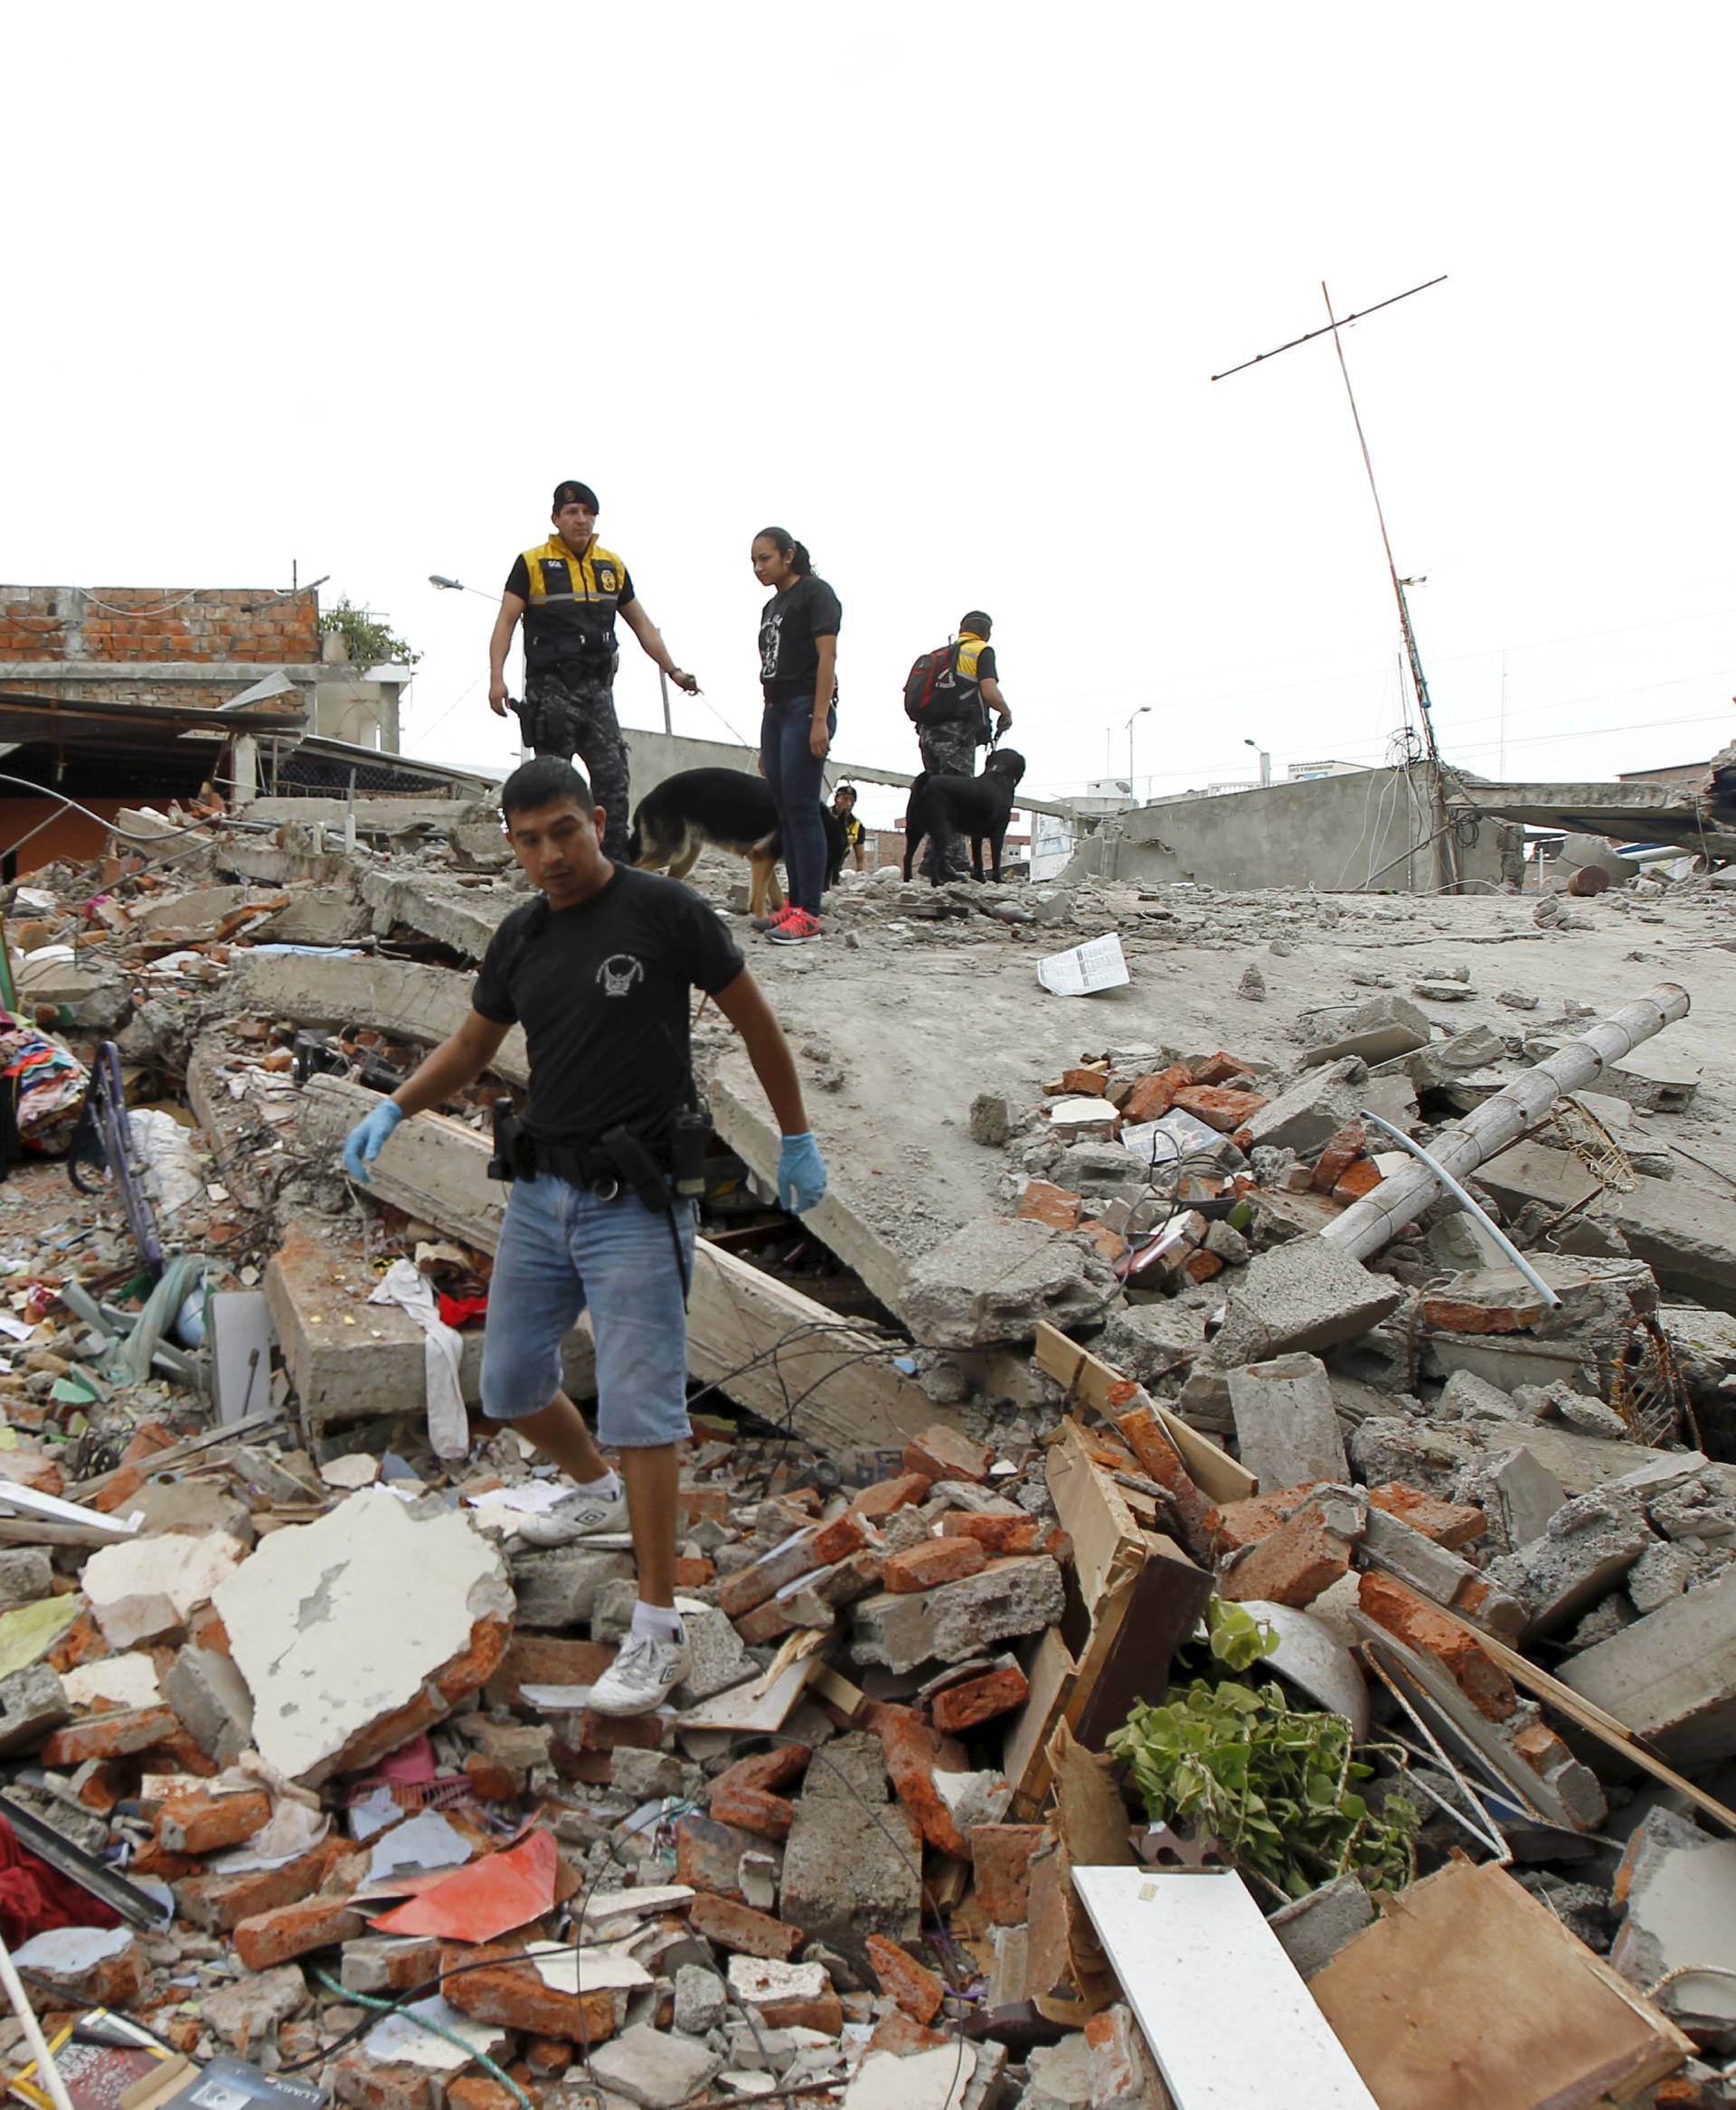 Red Cross members, military and police officers work at a collapsed area after an earthquake struck off the Pacific coast, at Tarqui neighborhood in Manta